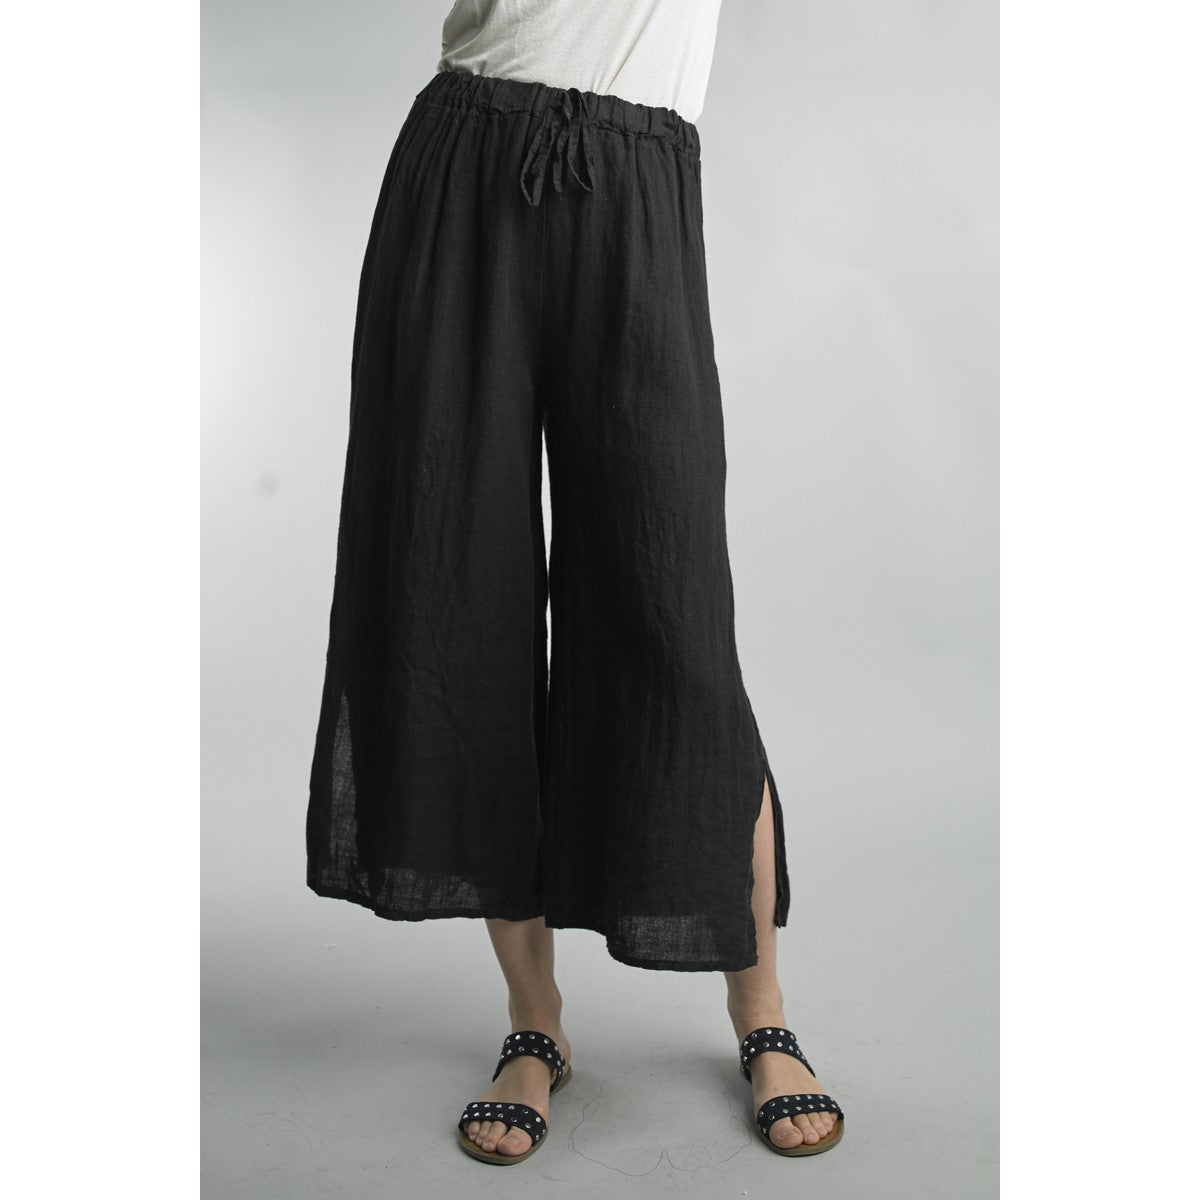 Linen Crop Pant (Available in 5 colors)